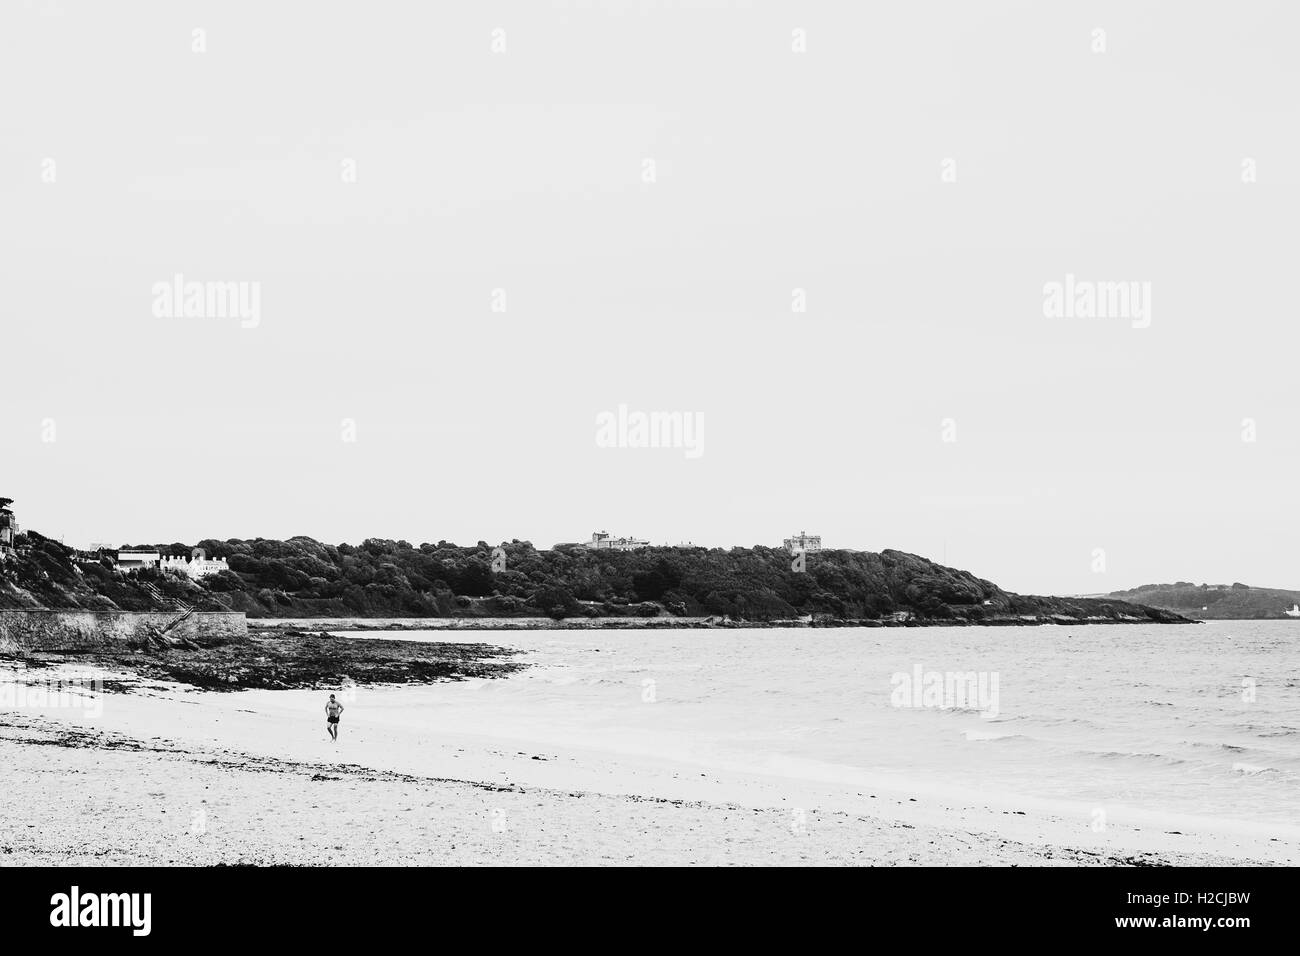 High contrast photograph of wild swimmer emerging from the sea at Gylyngvase Beach, Falmouth, Cornwall Stock Photo